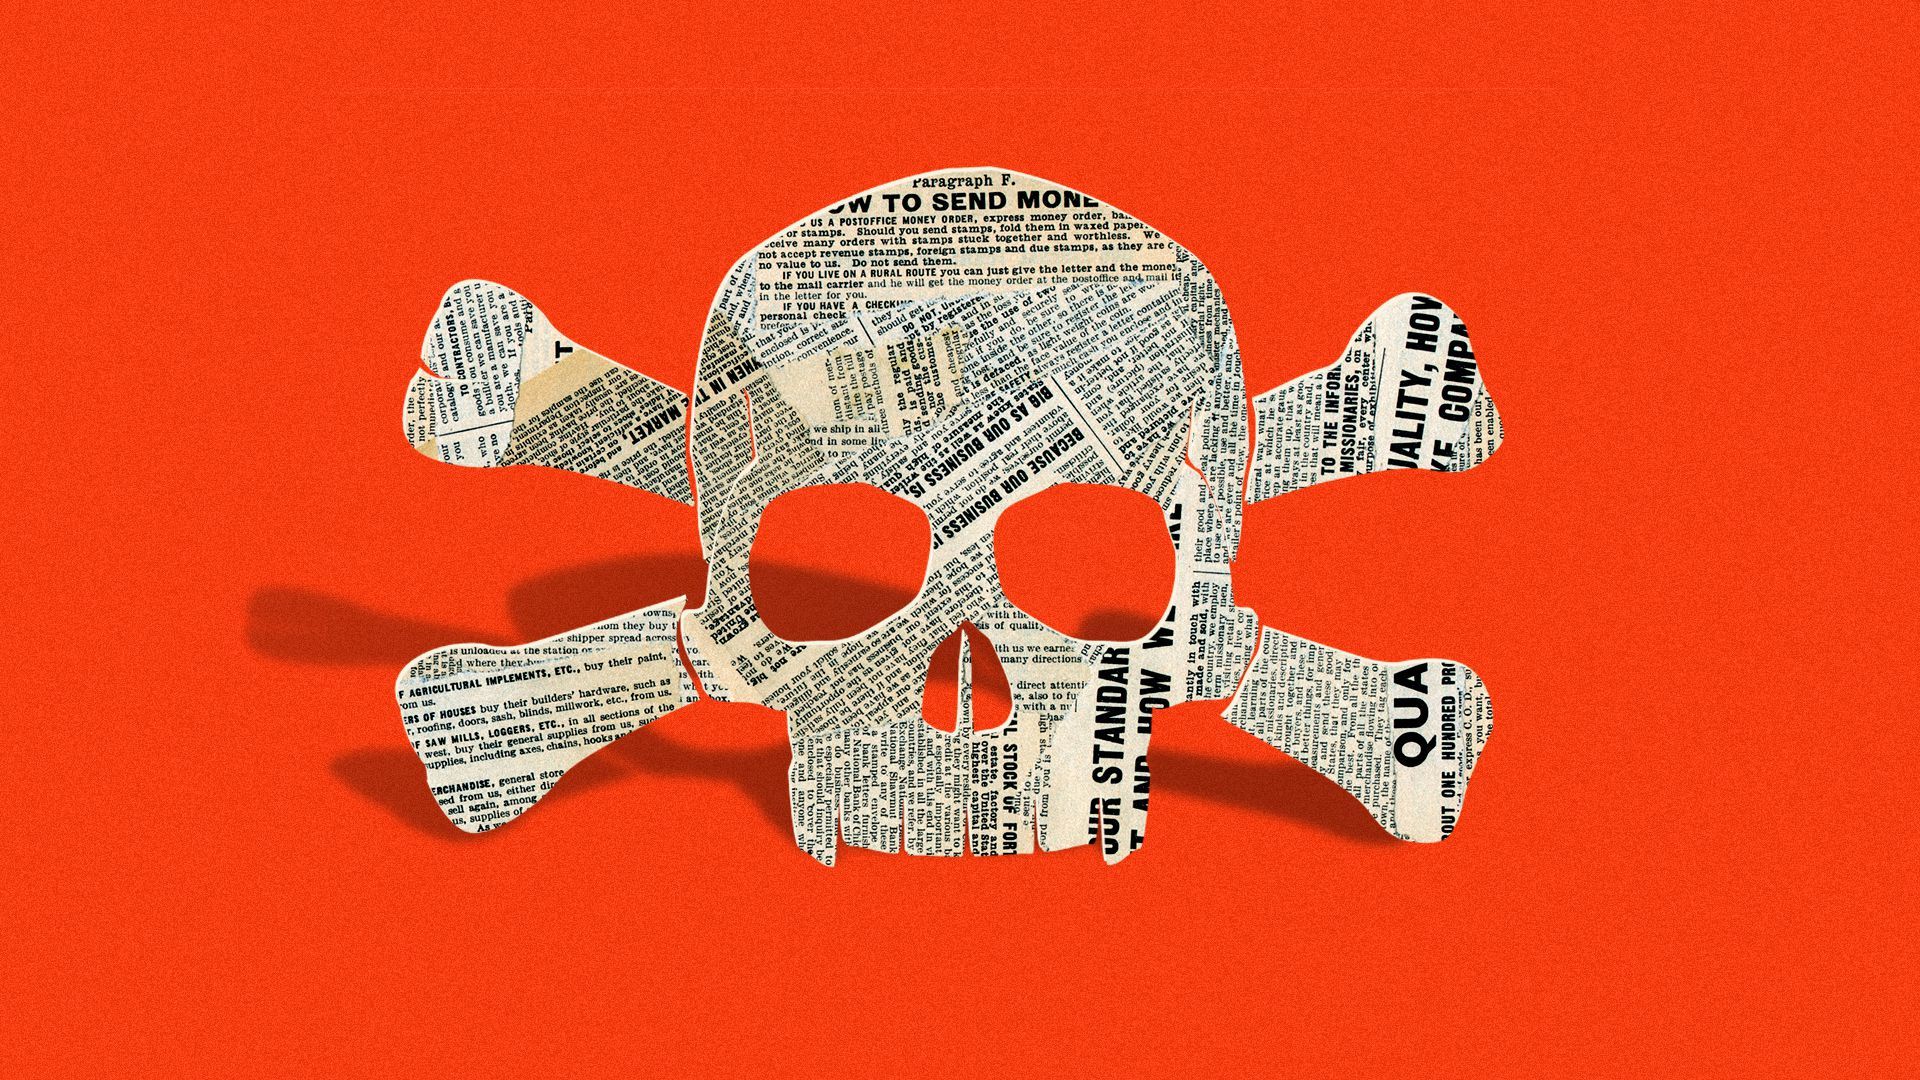 Illustration of a skull and bones made out of newspaper